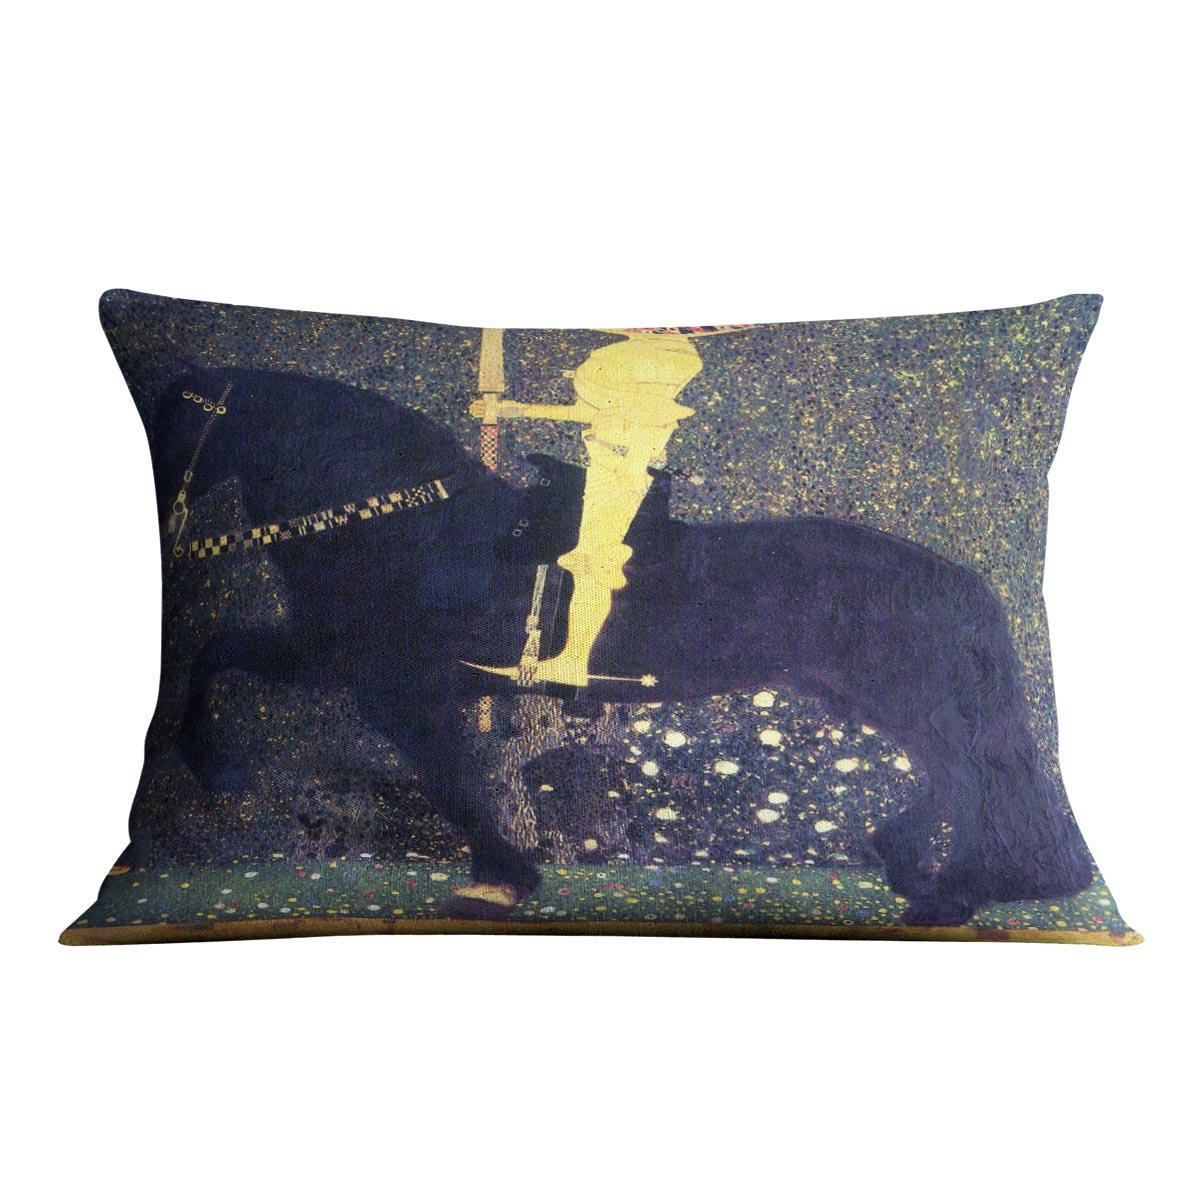 The life of a struggle The Golden Knights by Klimt Throw Pillow